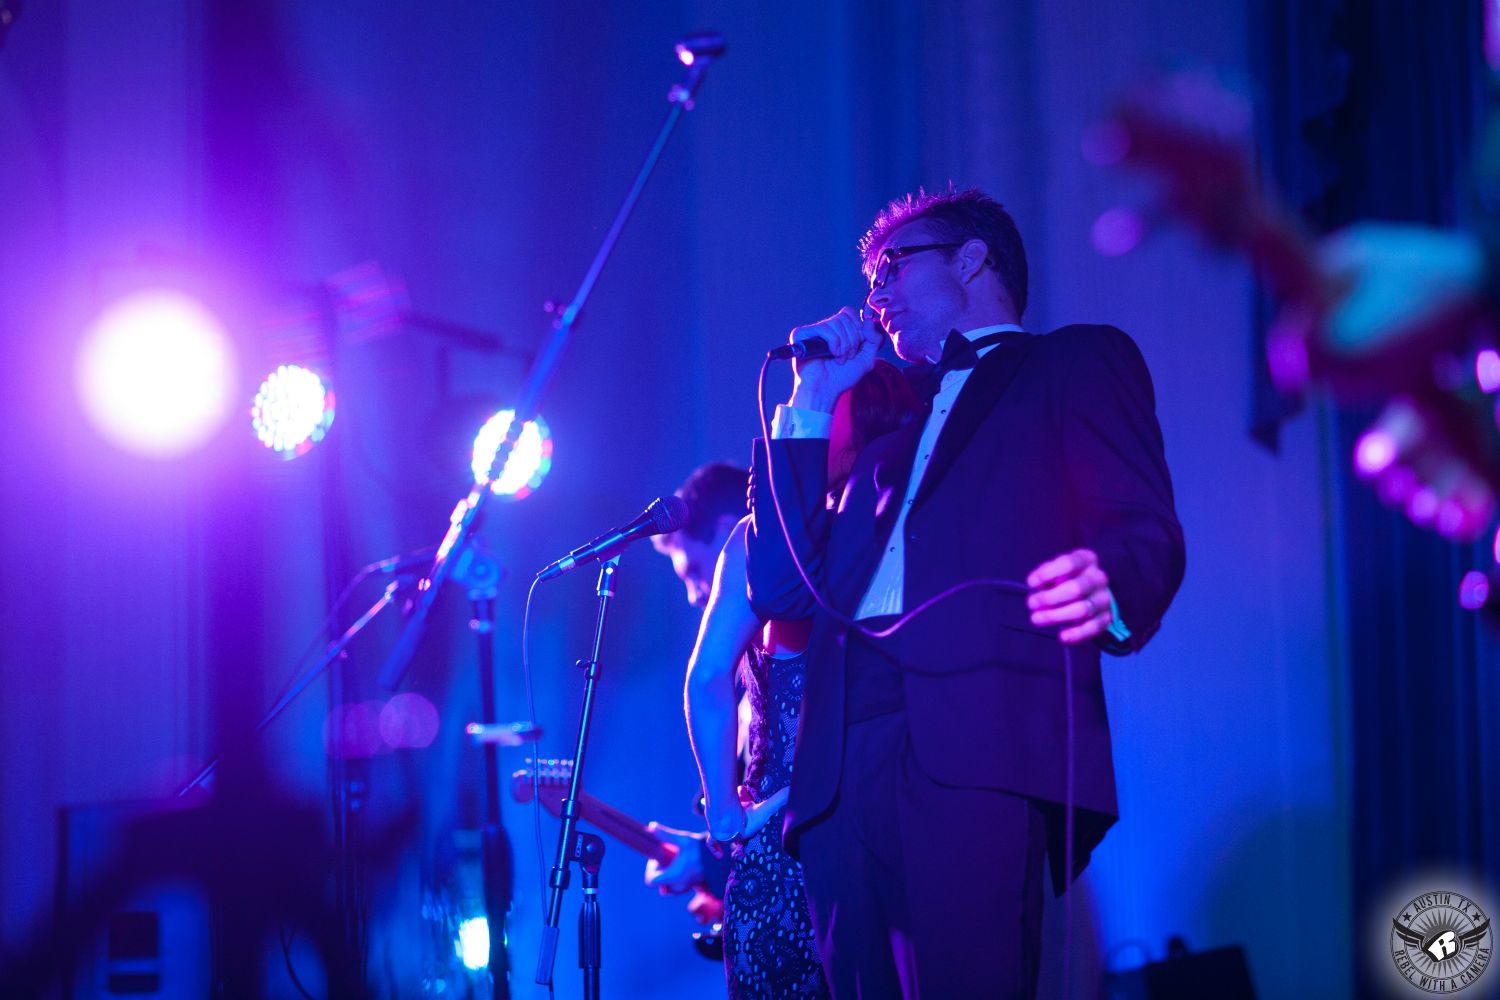 Dynamic shot of the lead singer of the Rocket Brothers Band playing at a wedding on stage at Texas Federation of Women's Clubs Mansion Headquarters with stunning blue and purple uplighting by  D&H Stage Lighting coordinated by Clearly Classy Events Austin wedding planner